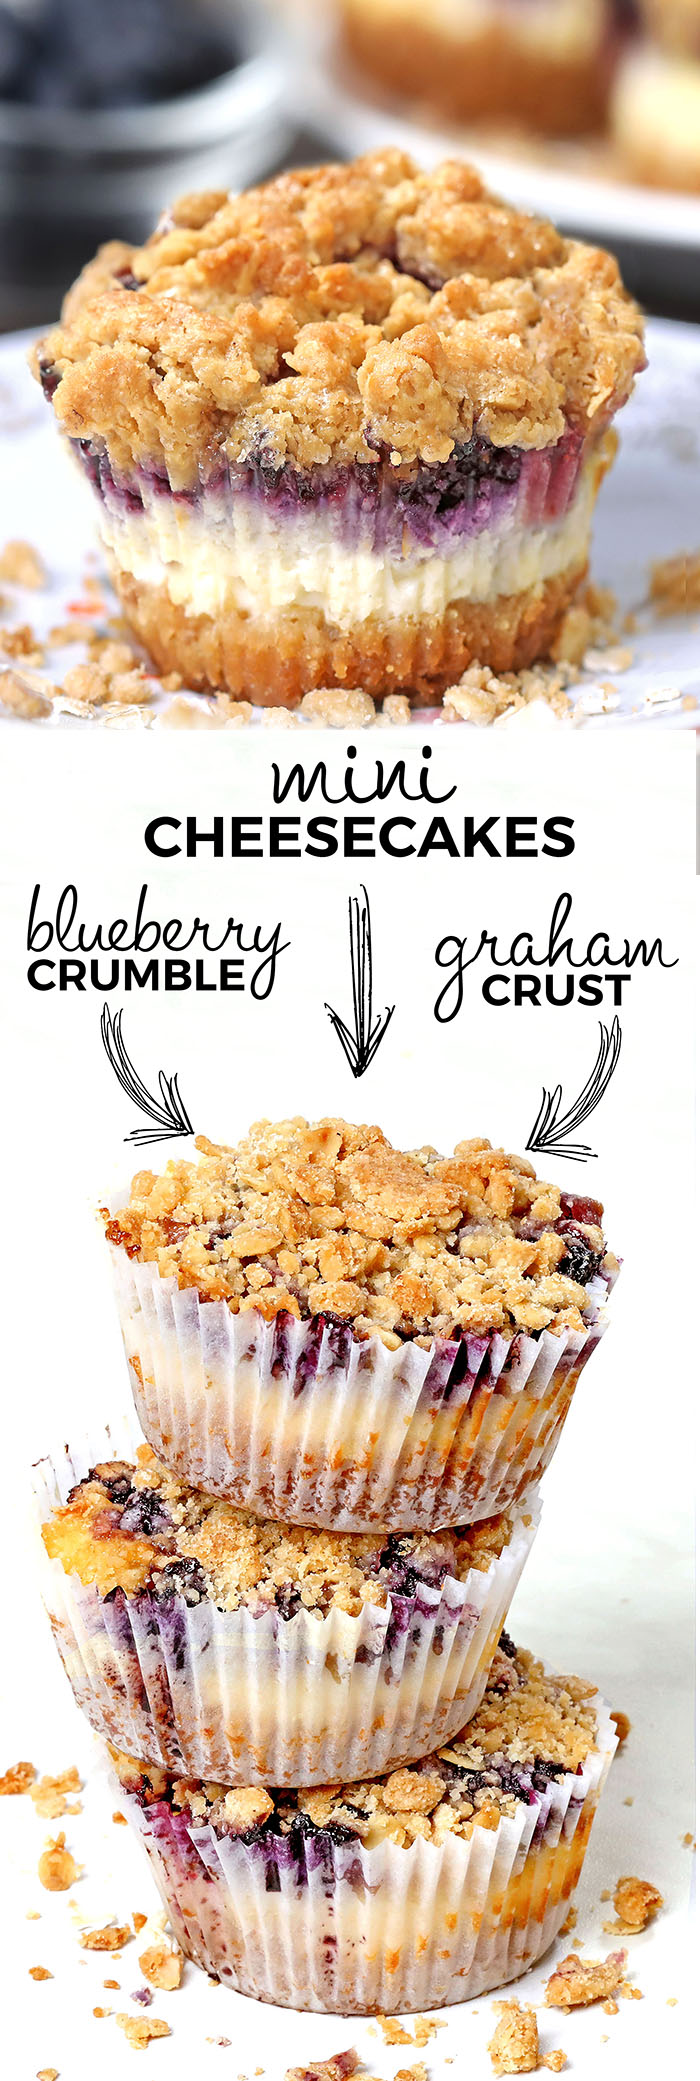 Blueberry Crumble Mini Cheesecakes are delicious just like your favorite blueberry crumble, baked on graham cracker crust and packed into perfect portable cheesecake dessert.